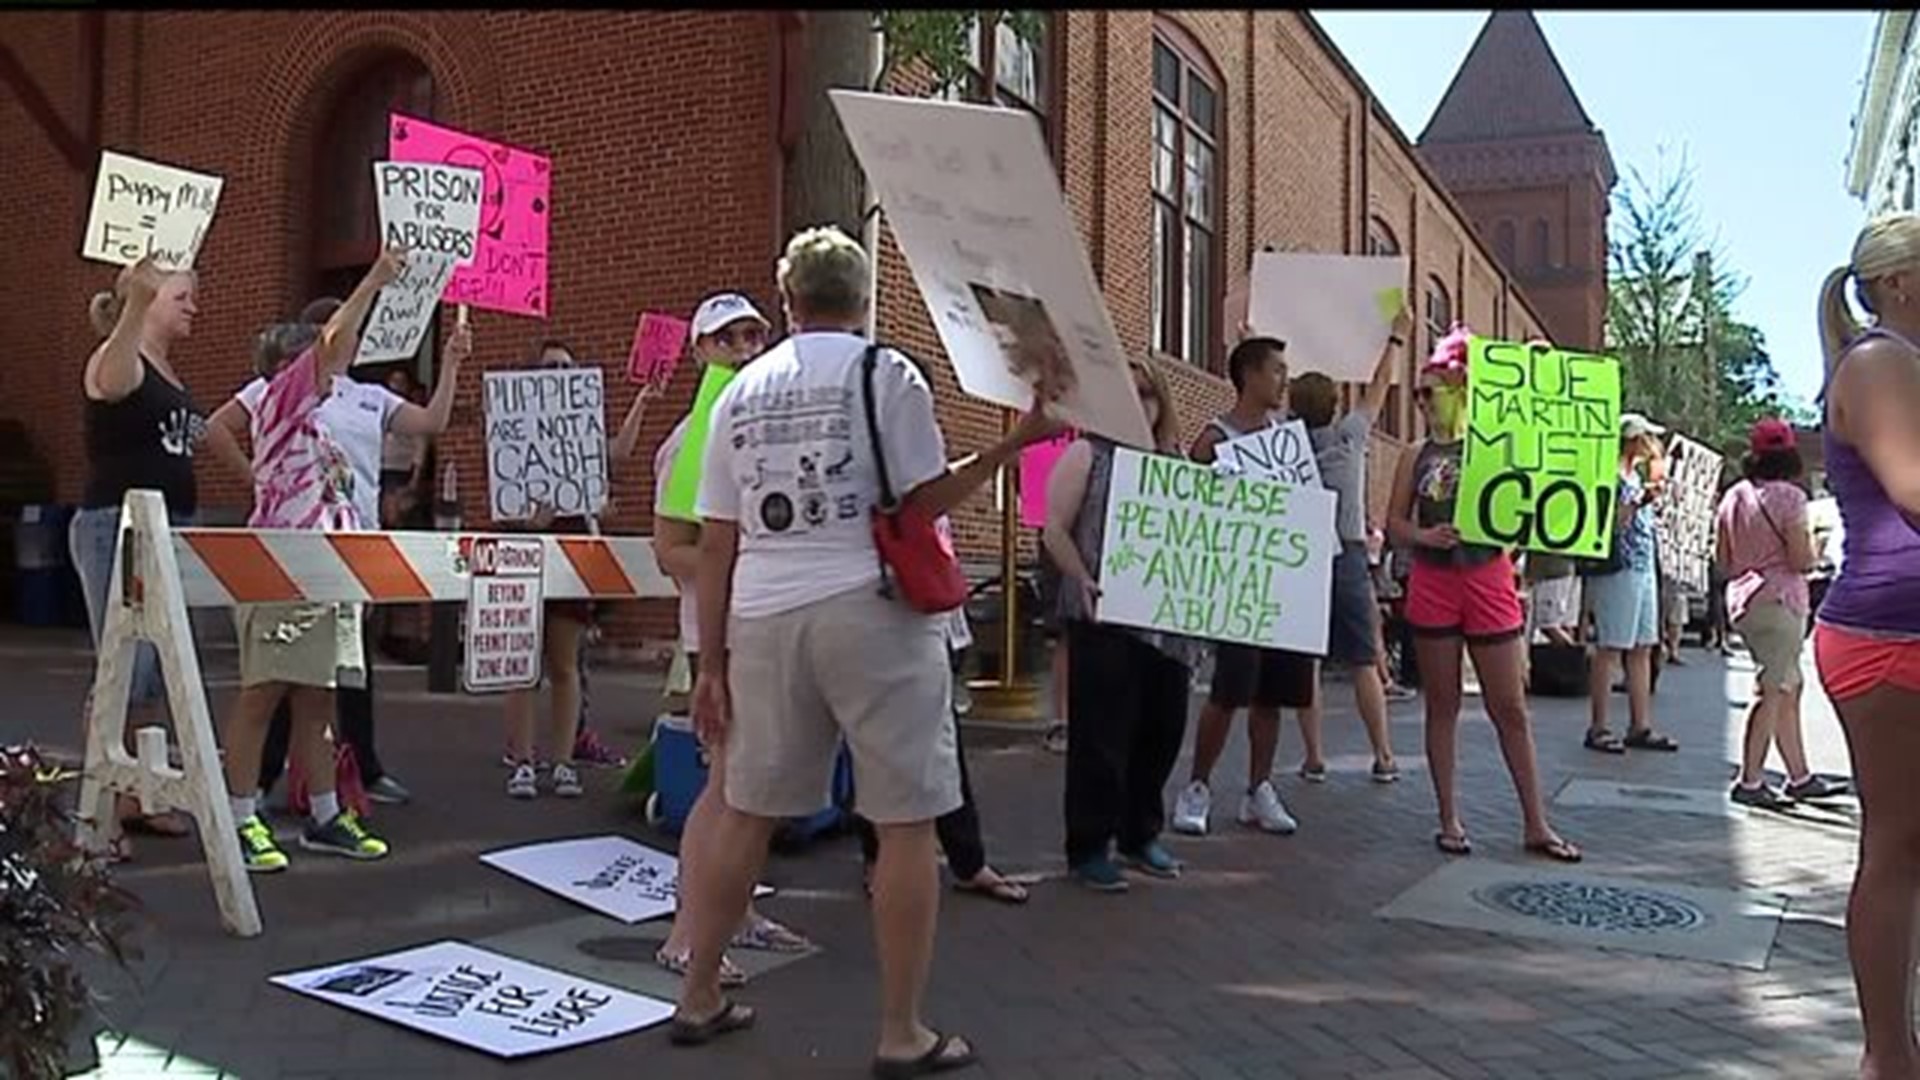 Protesters speak out against animal abuse